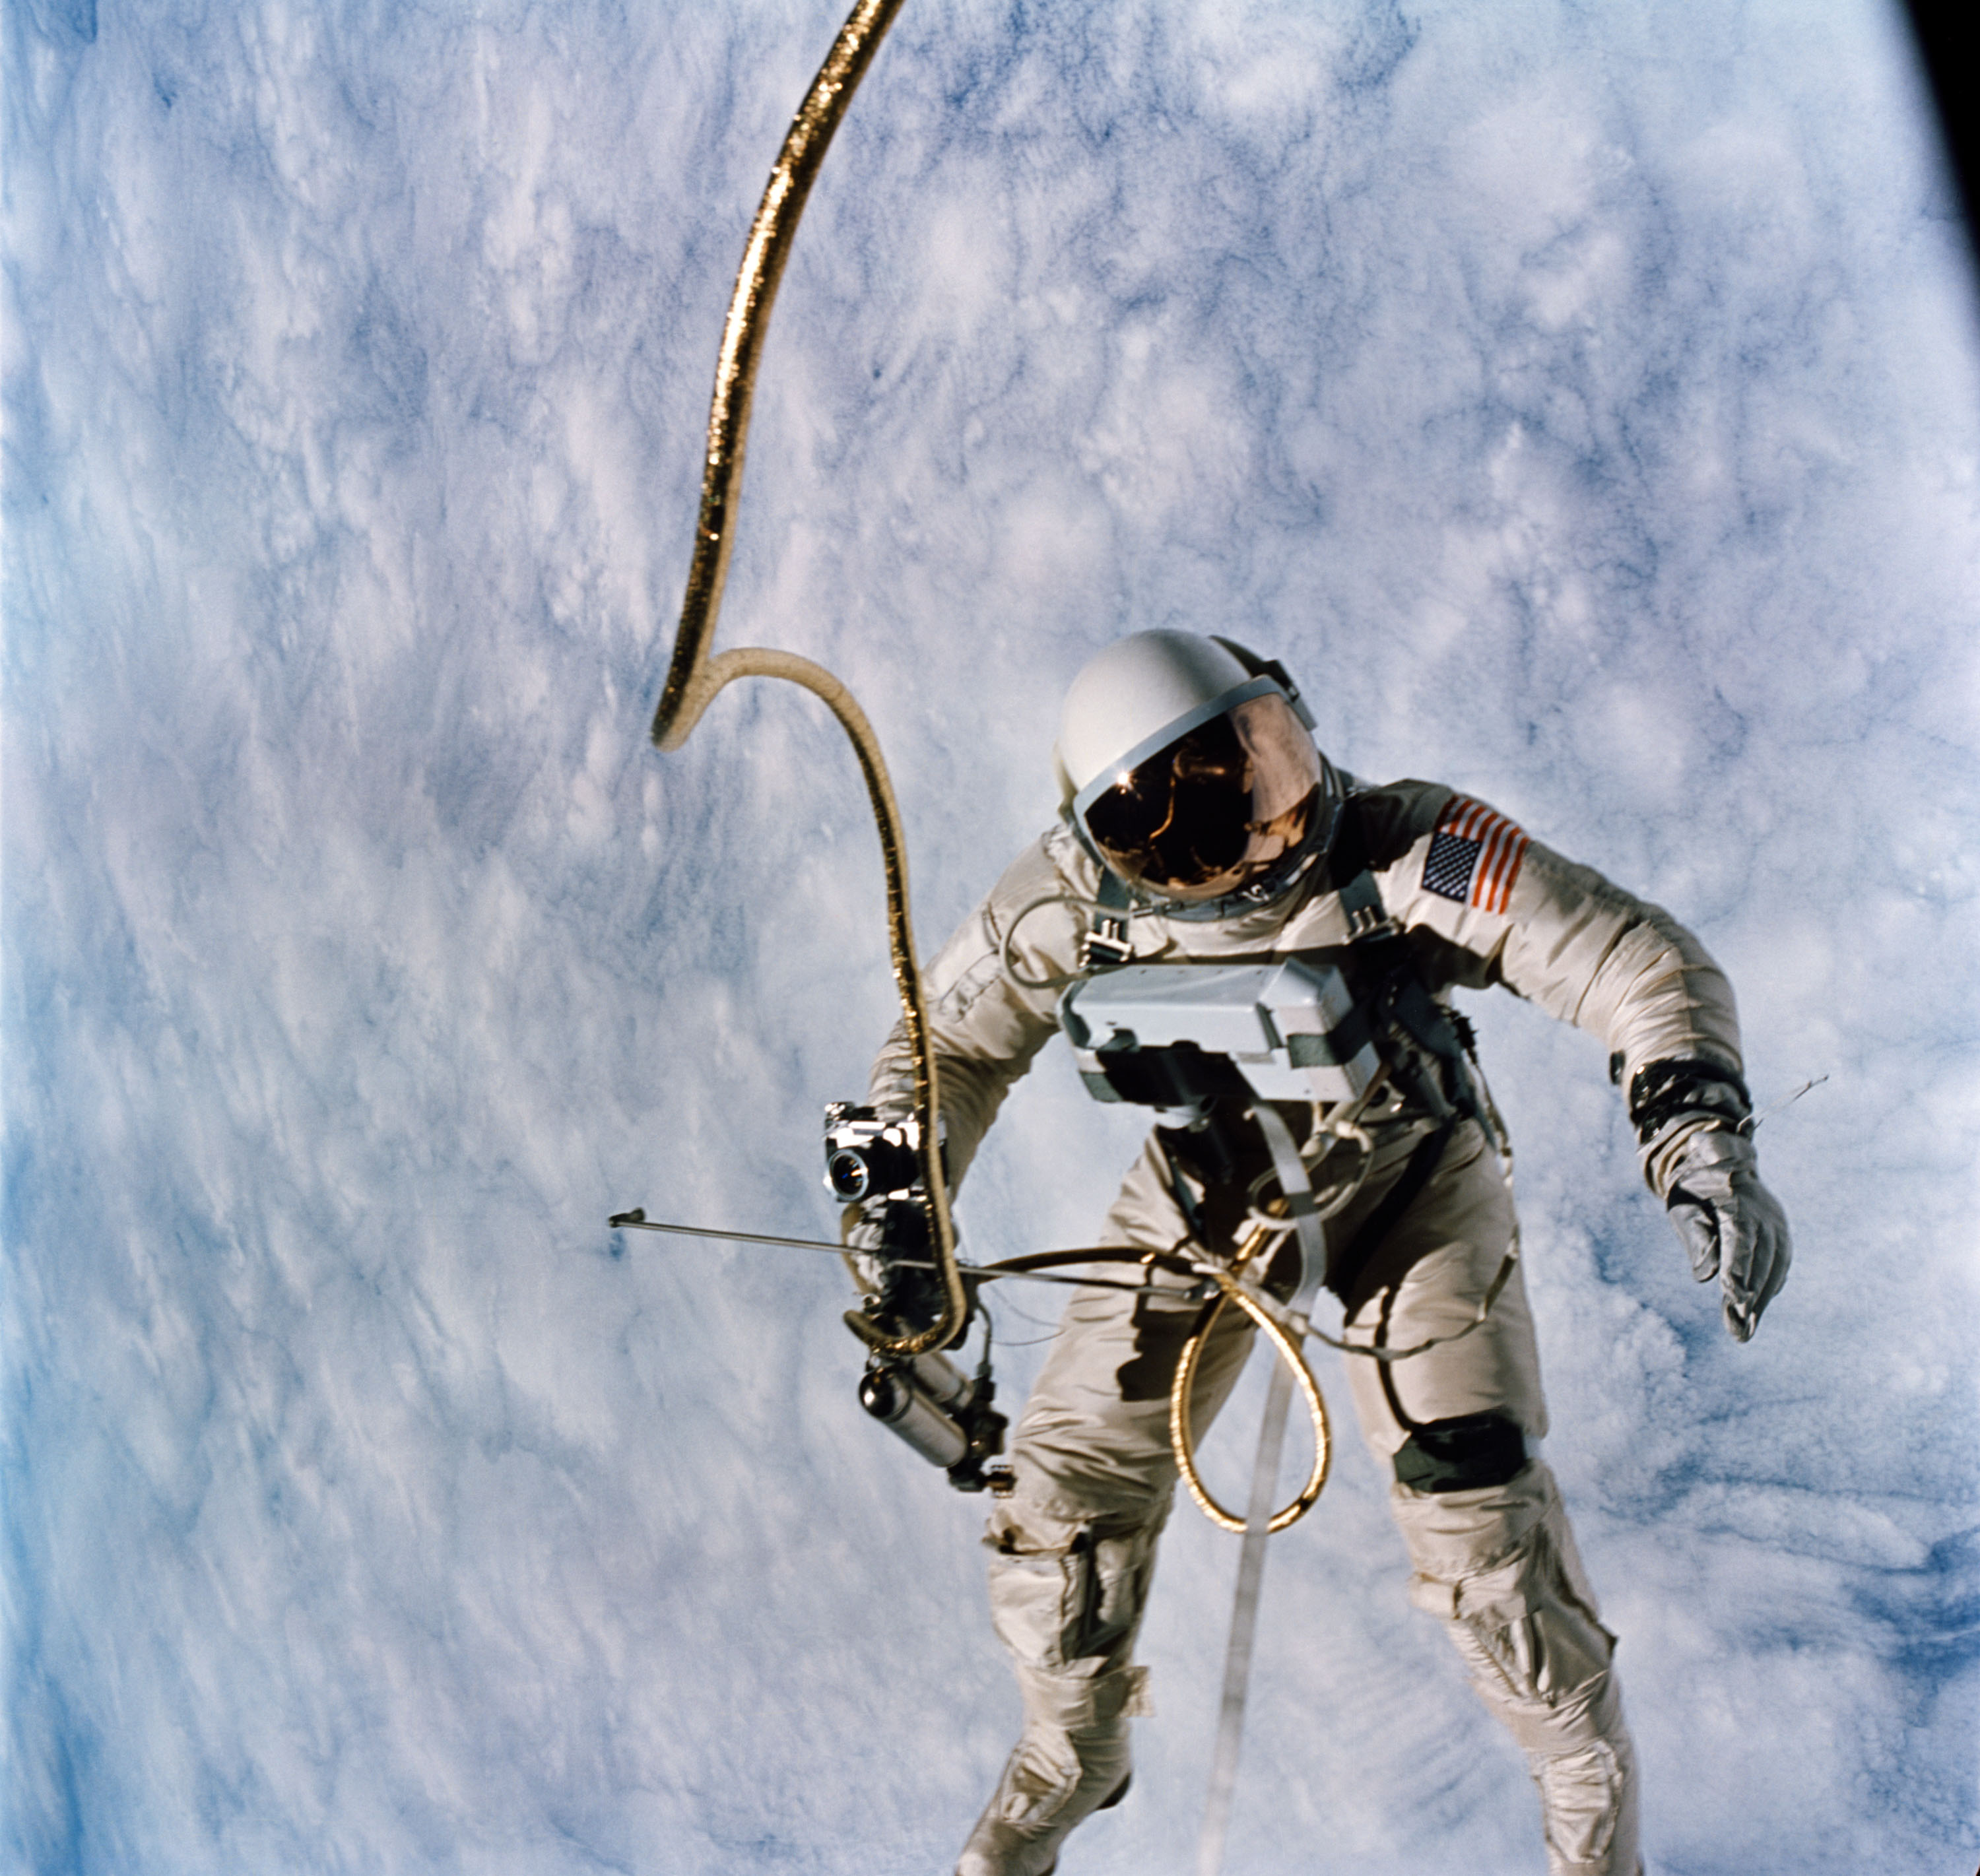 Clasping the cold-gas maneuvering gun in his right hand, and trailed by a snake-like tether, Ed White tumbles over a cloud-speckled Earth during the United States' first EVA. Photo Credit: NASA